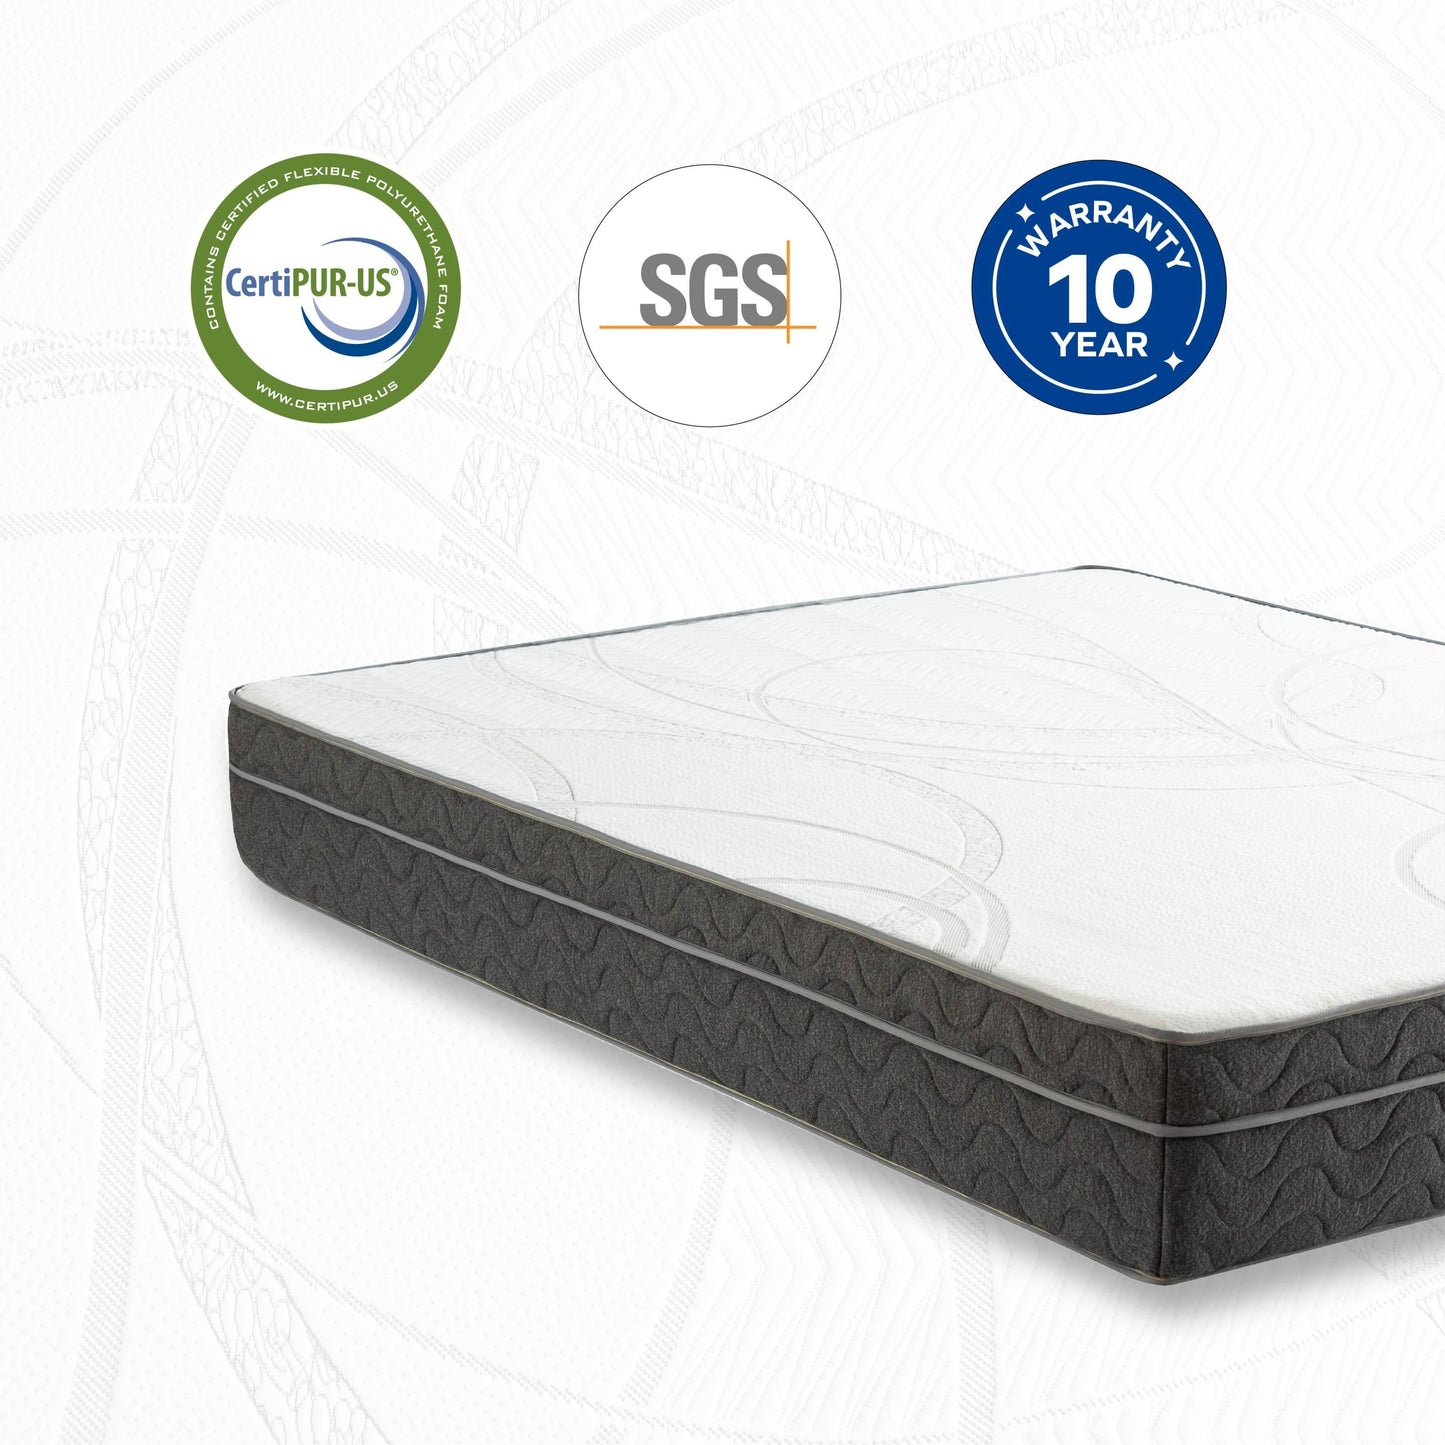 EGO Hybrid 10 Inch CalKing Mattress, Cooling Gel Infused Memory Foam and Individual Pocket Spring Mattress, Made in USA, Mattress in a Box, CertiPUR-US Certified